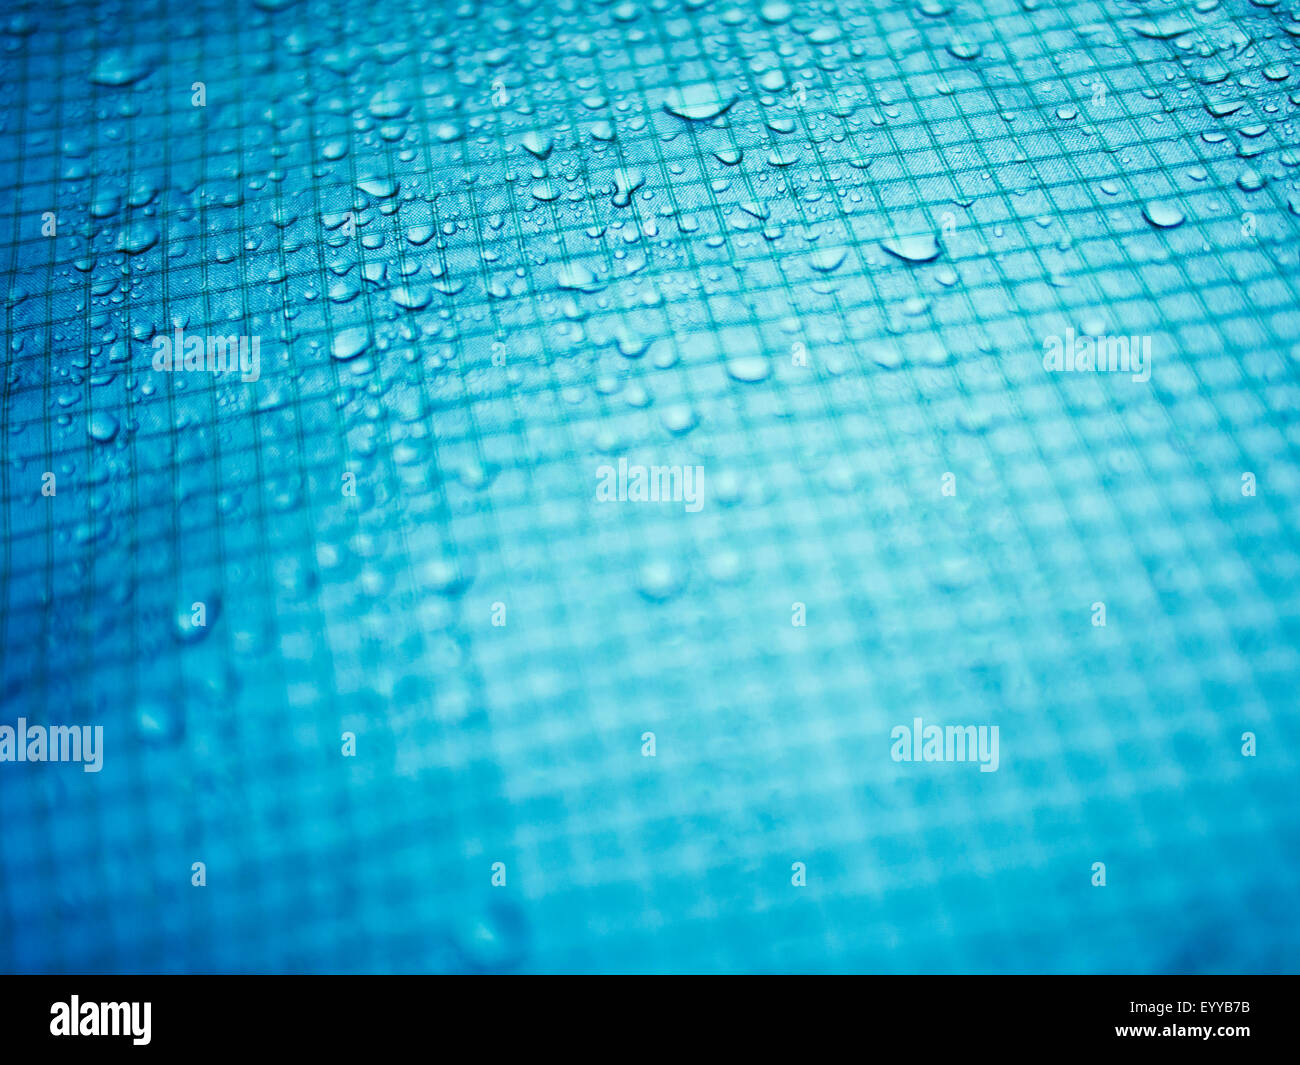 Close up of water droplets on grid surface Stock Photo